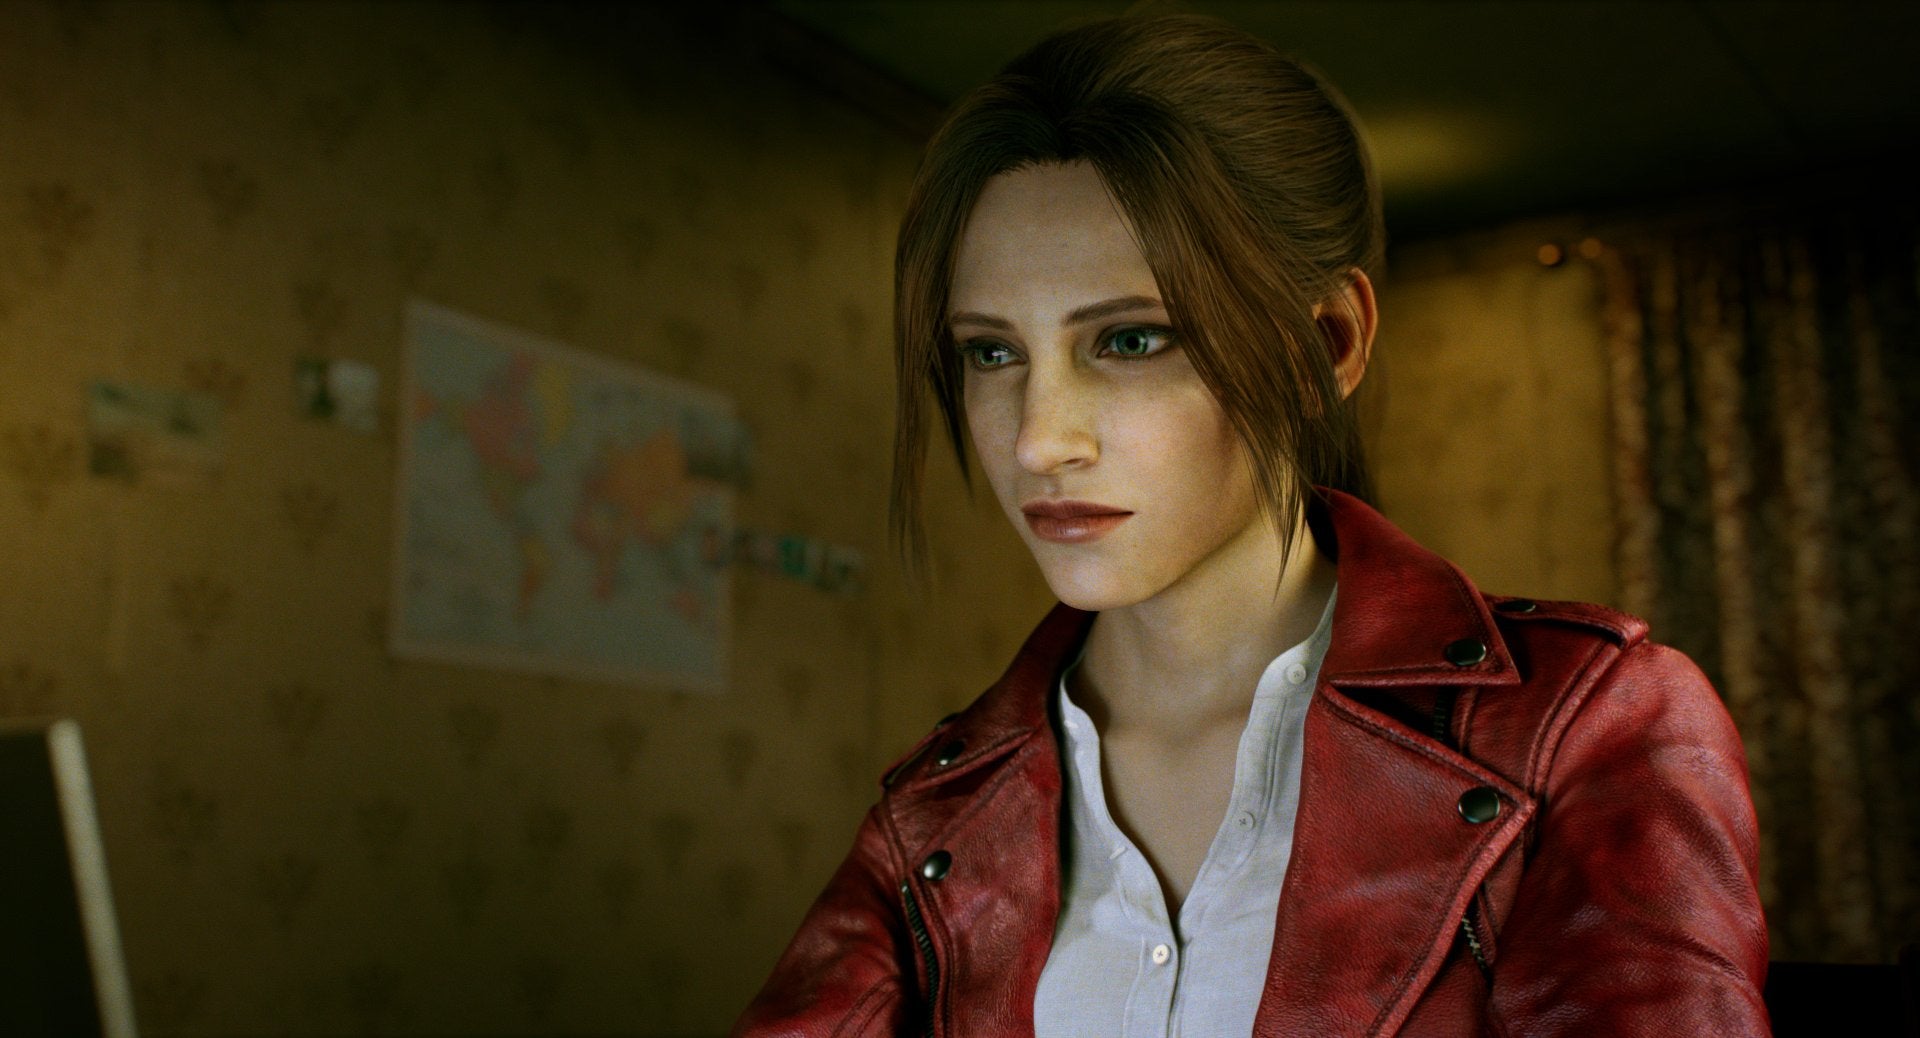 Image for Netflix shows off Resident Evil: Infinite Darkness images featuring Claire and Leon